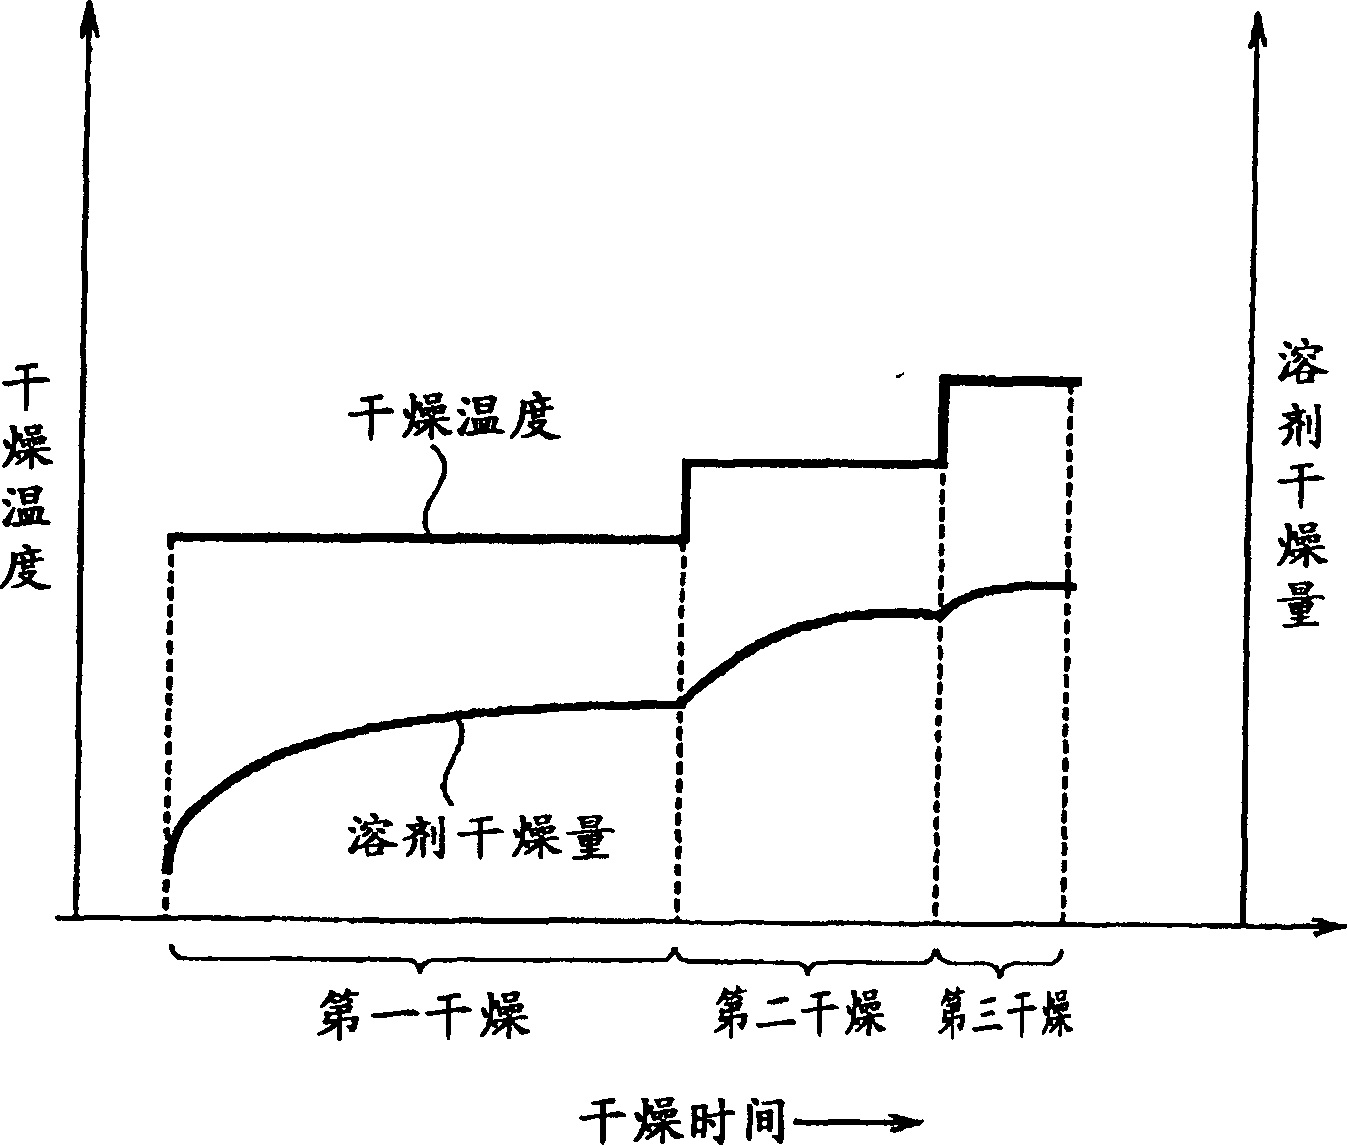 Method of liquid-drop jet coating and method of producing display devices